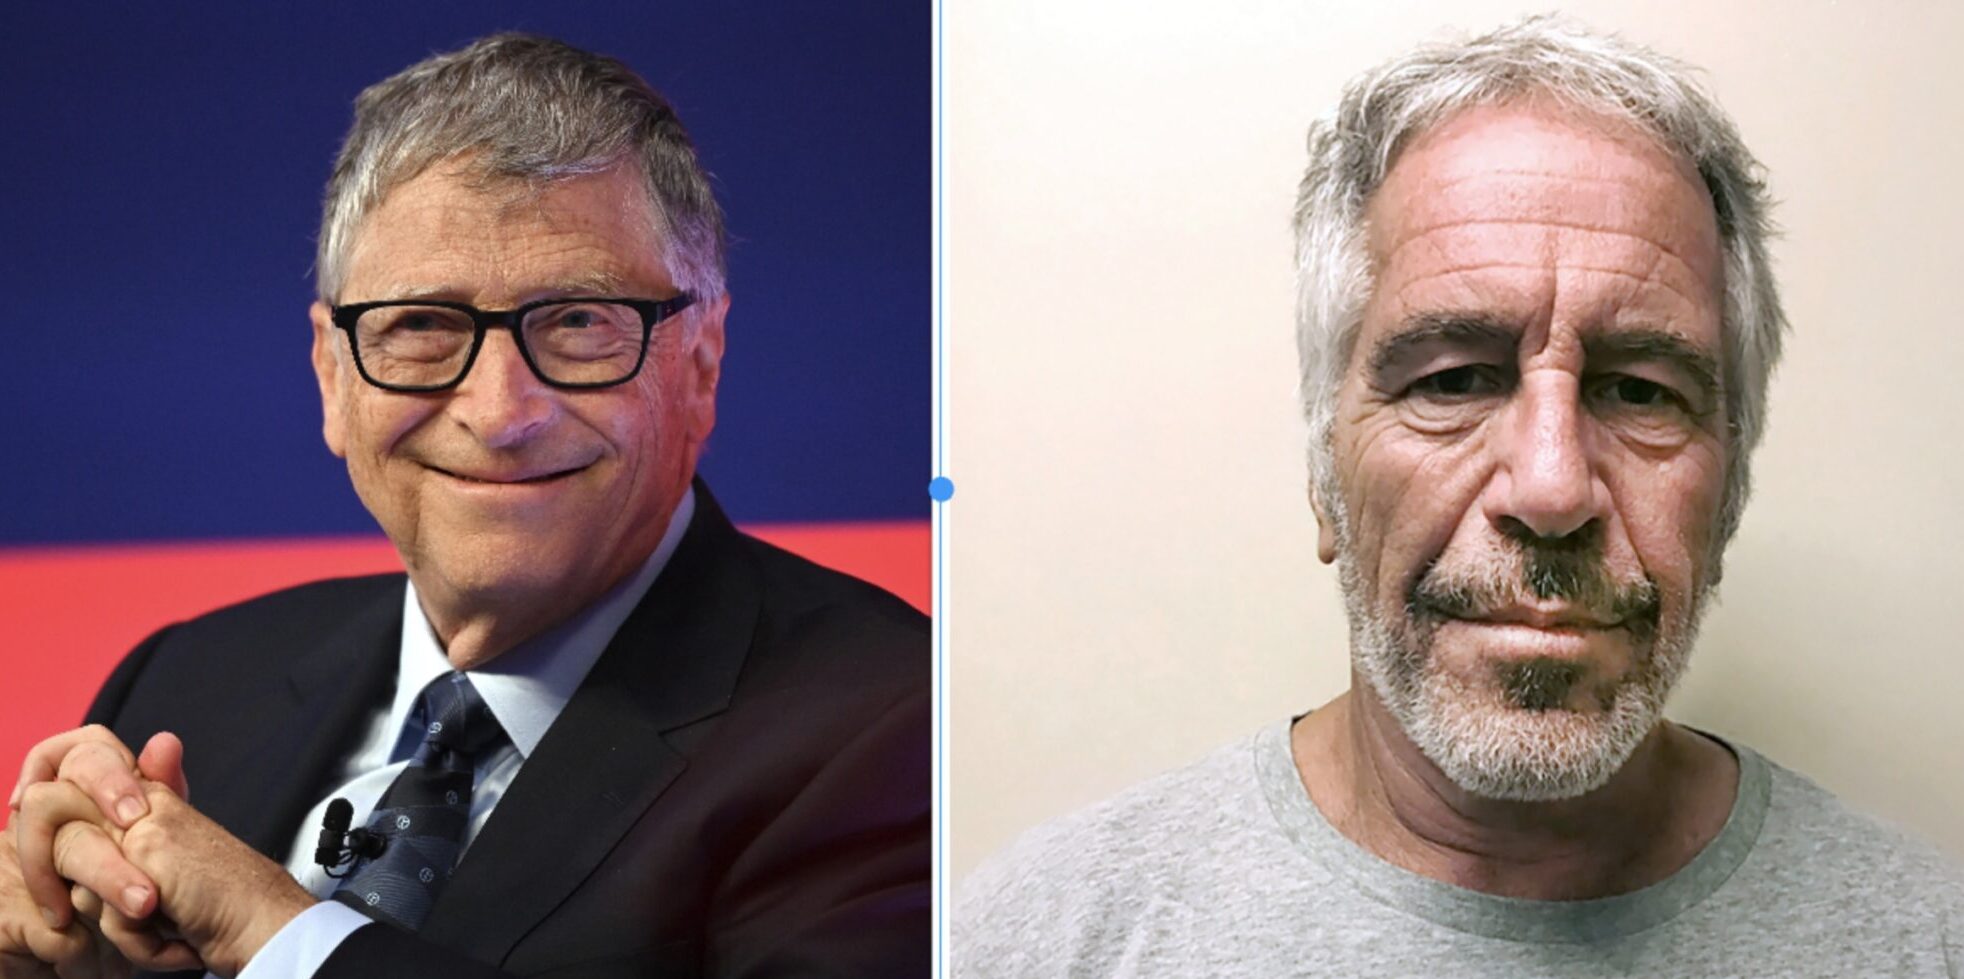 Wild New Report Reveals Jeffrey Epstein Found Out Bill Gates Was Having an Affair and Then Appeared to Try to Blackmail Him (mediaite.com)